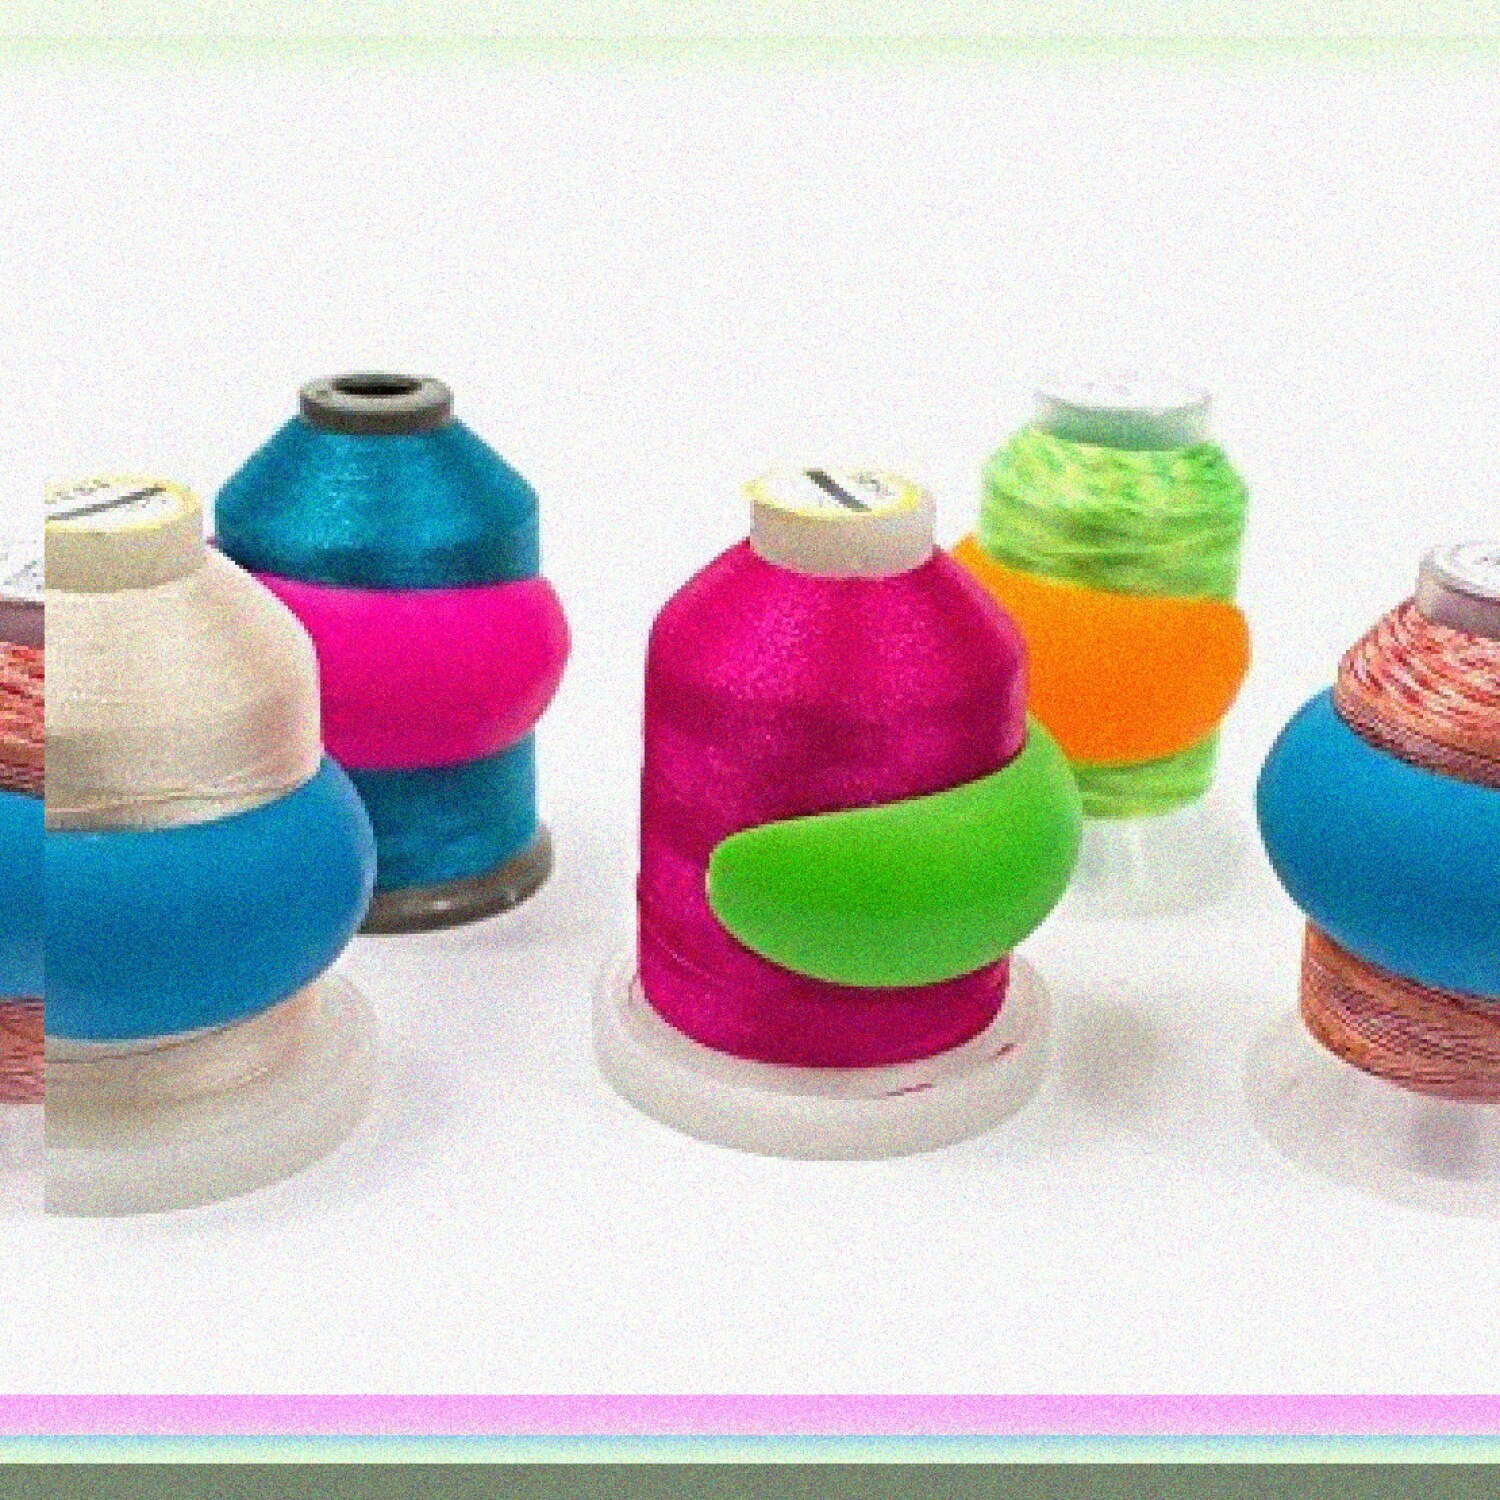 ThreadTidy 48-Pack: Mess-Free Spool Savers - No Unwinding, No Loose Ends!